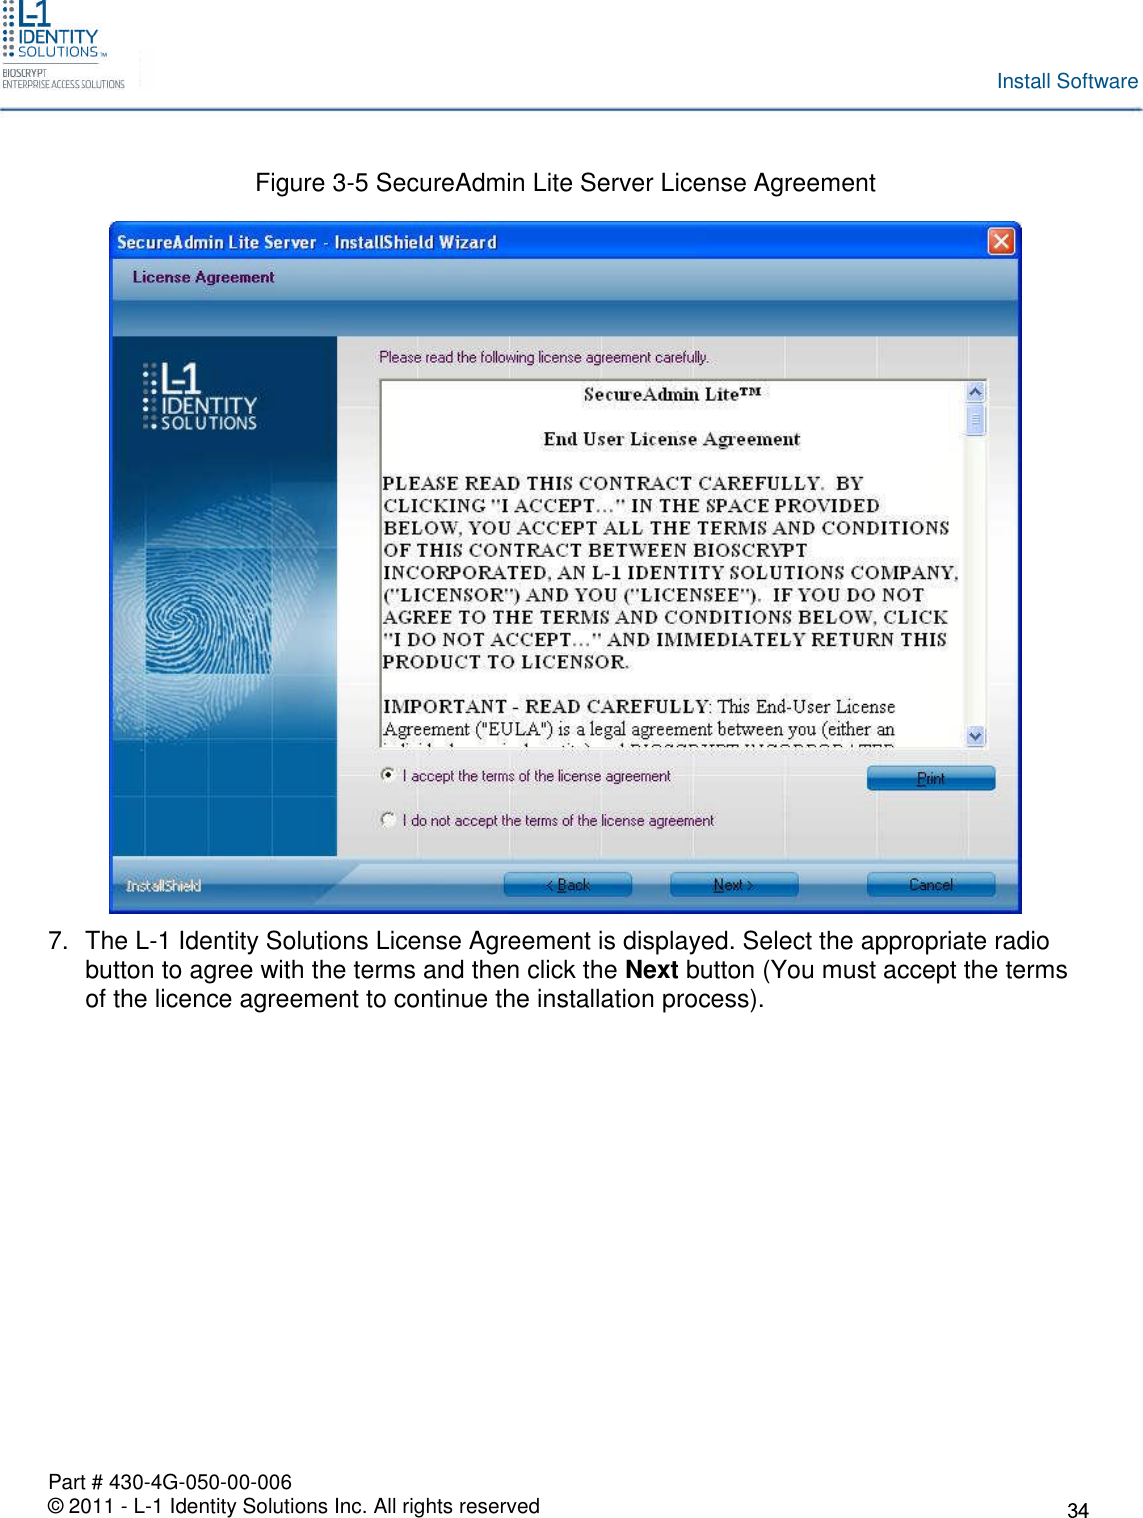 Part # 430-4G-050-00-006© 2011 - L-1 Identity Solutions Inc. All rights reservedInstall SoftwareFigure 3-5 SecureAdmin Lite Server License Agreement7. The L-1 Identity Solutions License Agreement is displayed. Select the appropriate radiobutton to agree with the terms and then click the Next button (You must accept the termsof the licence agreement to continue the installation process).